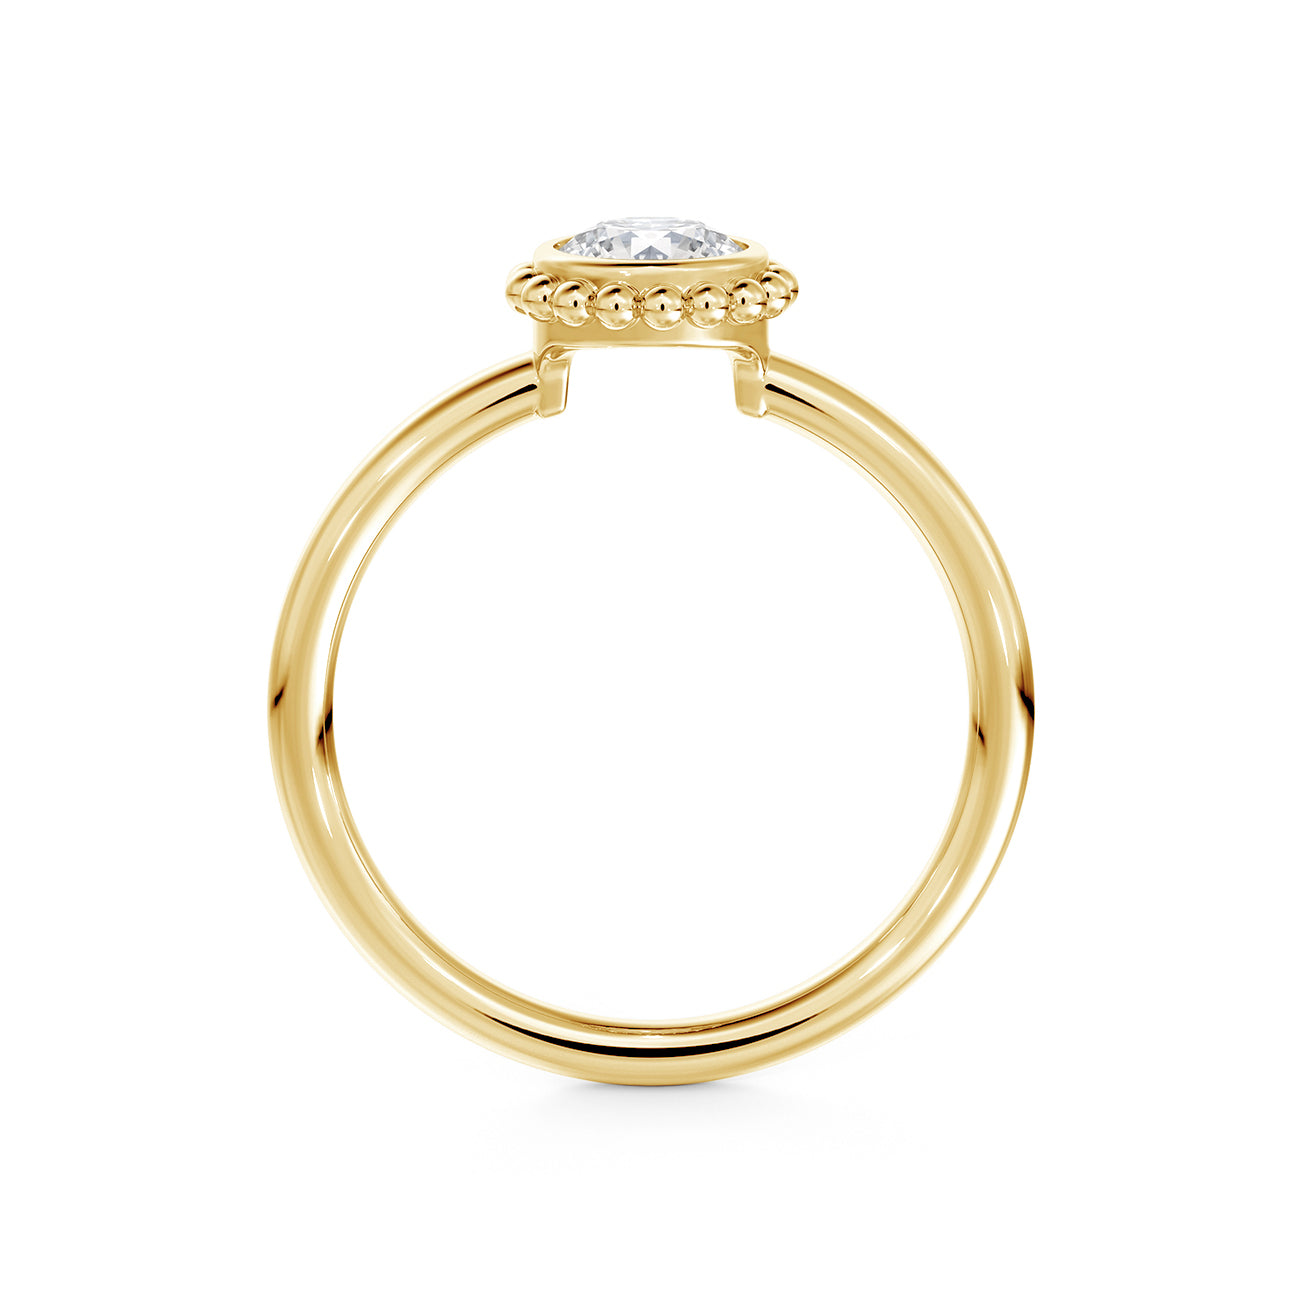 De Beers Forevermark Tribute Yellow Gold Beaded Halo Diamond Ring